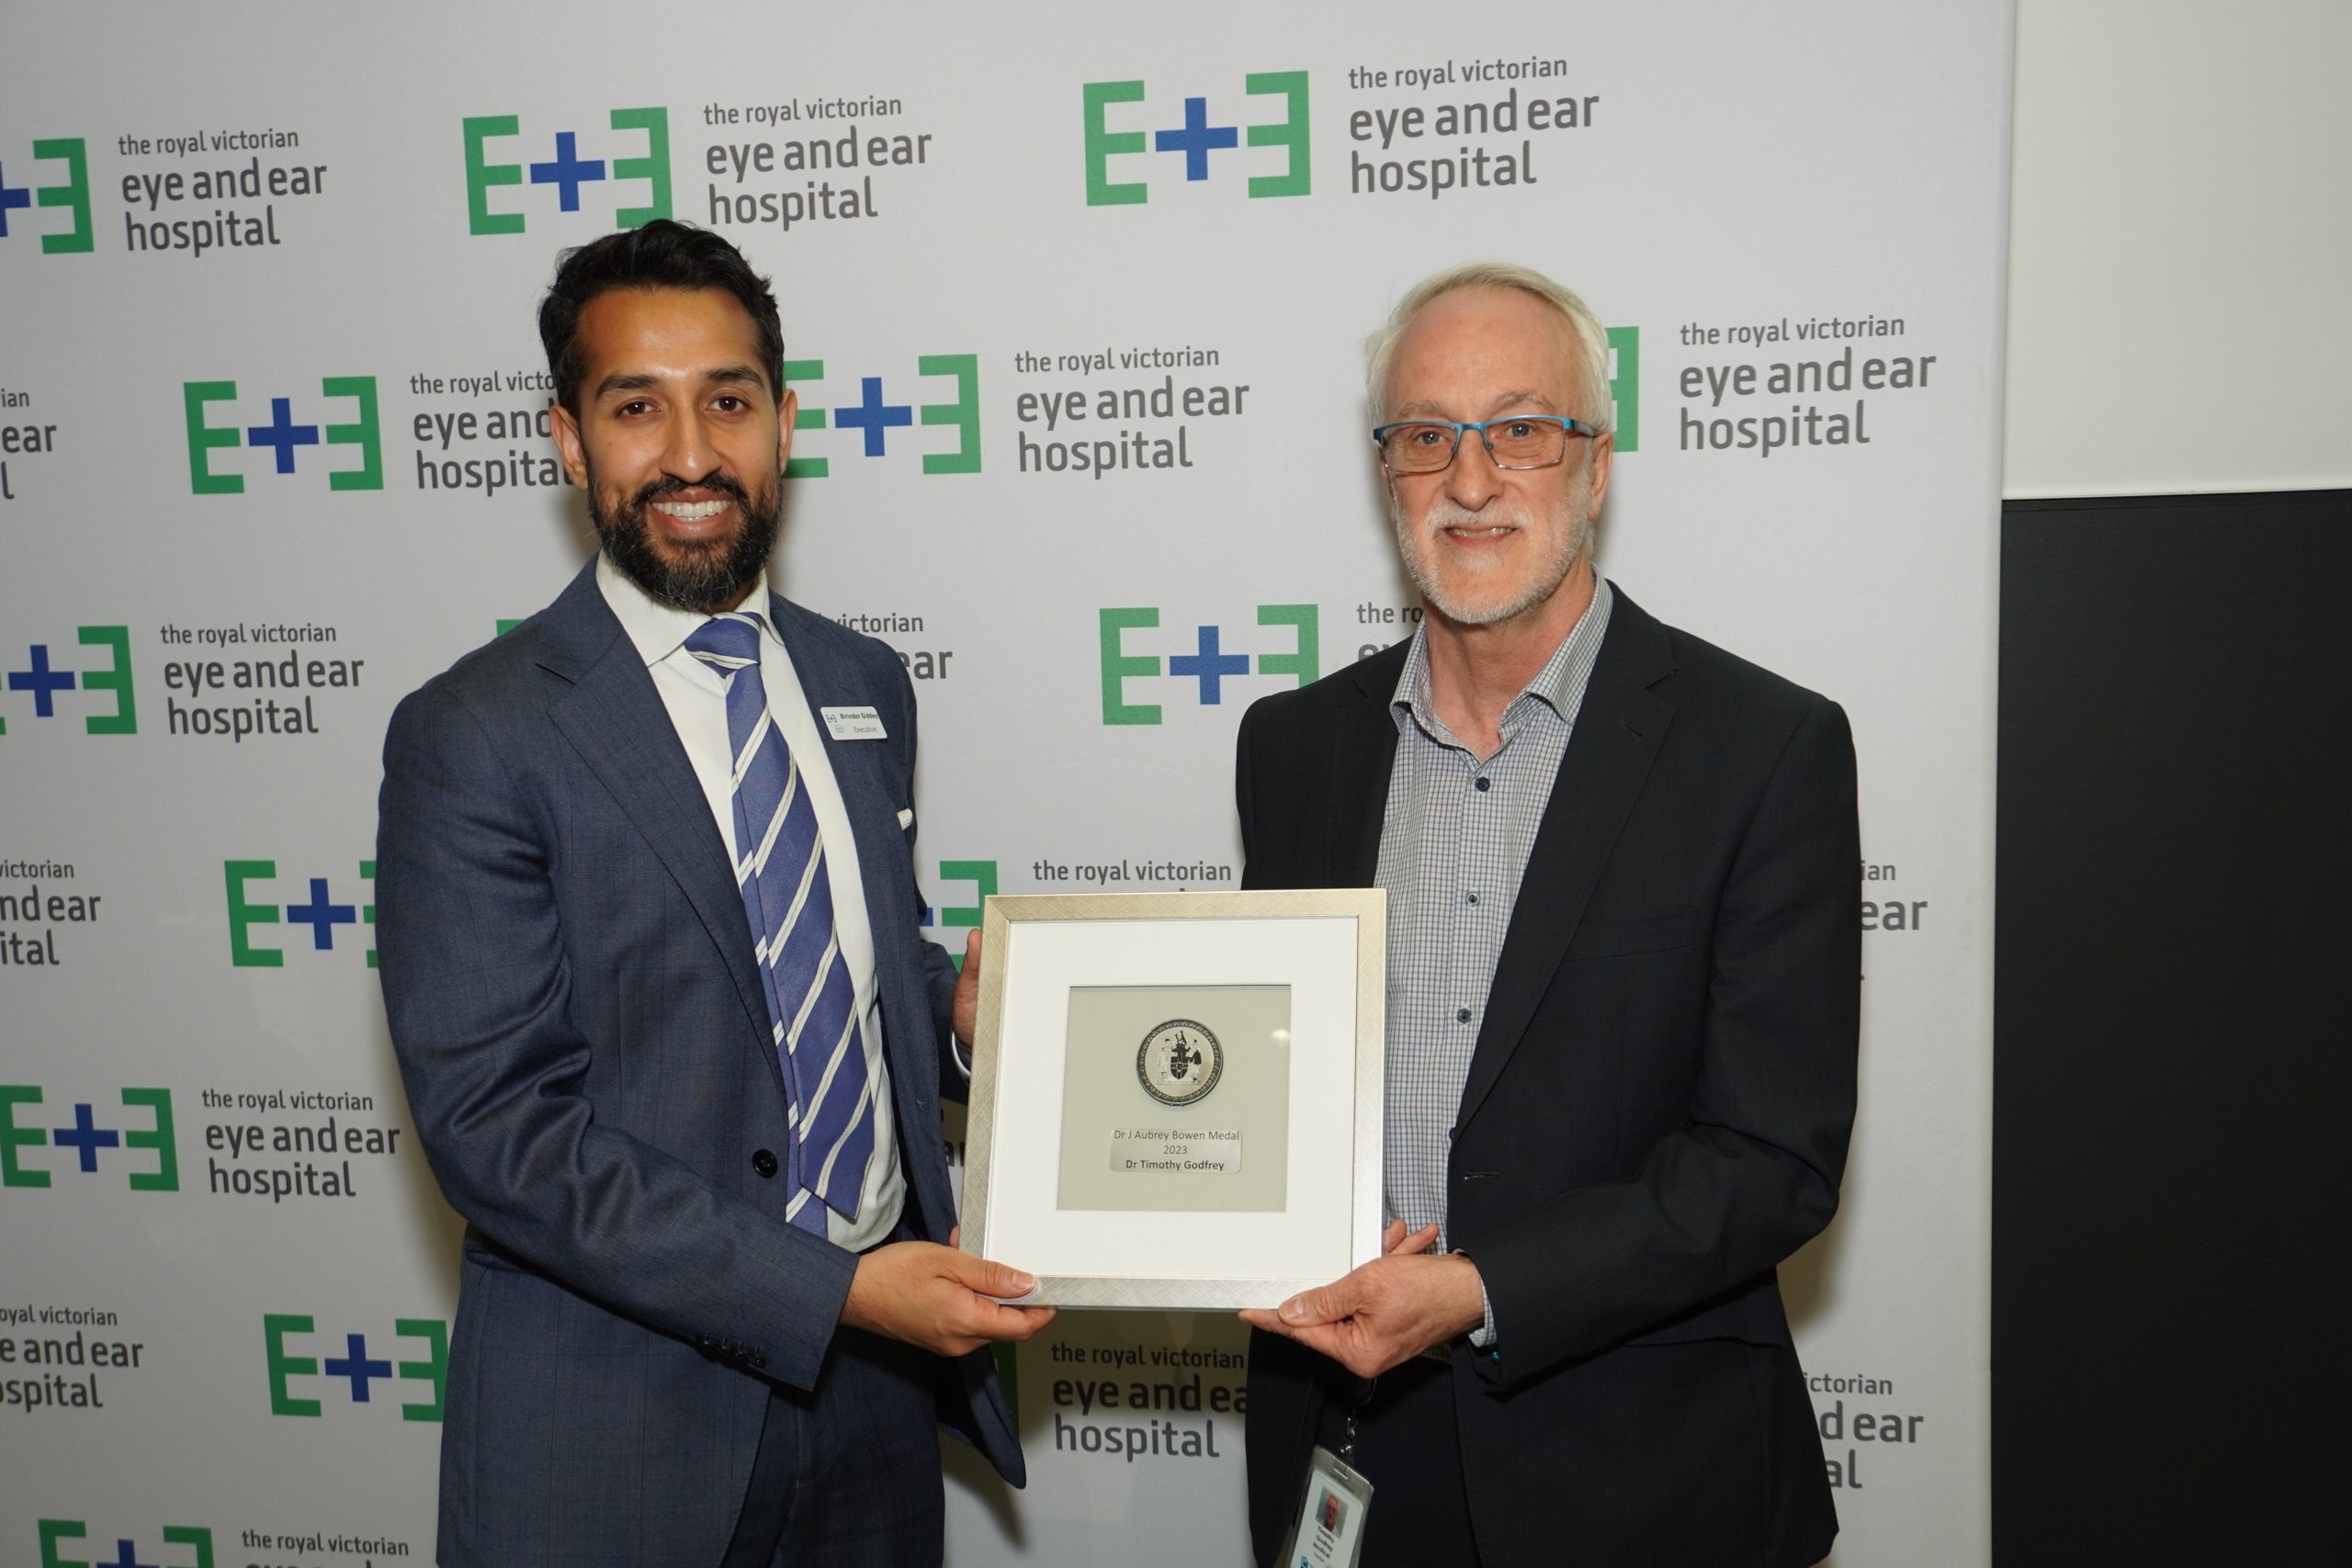 Executive Director Dr Birinder Giddy presenting the Dr J Aubrey Bowen Medal to Dr Tim Godfrey. They stand together smiling against an Eye and Ear logo background